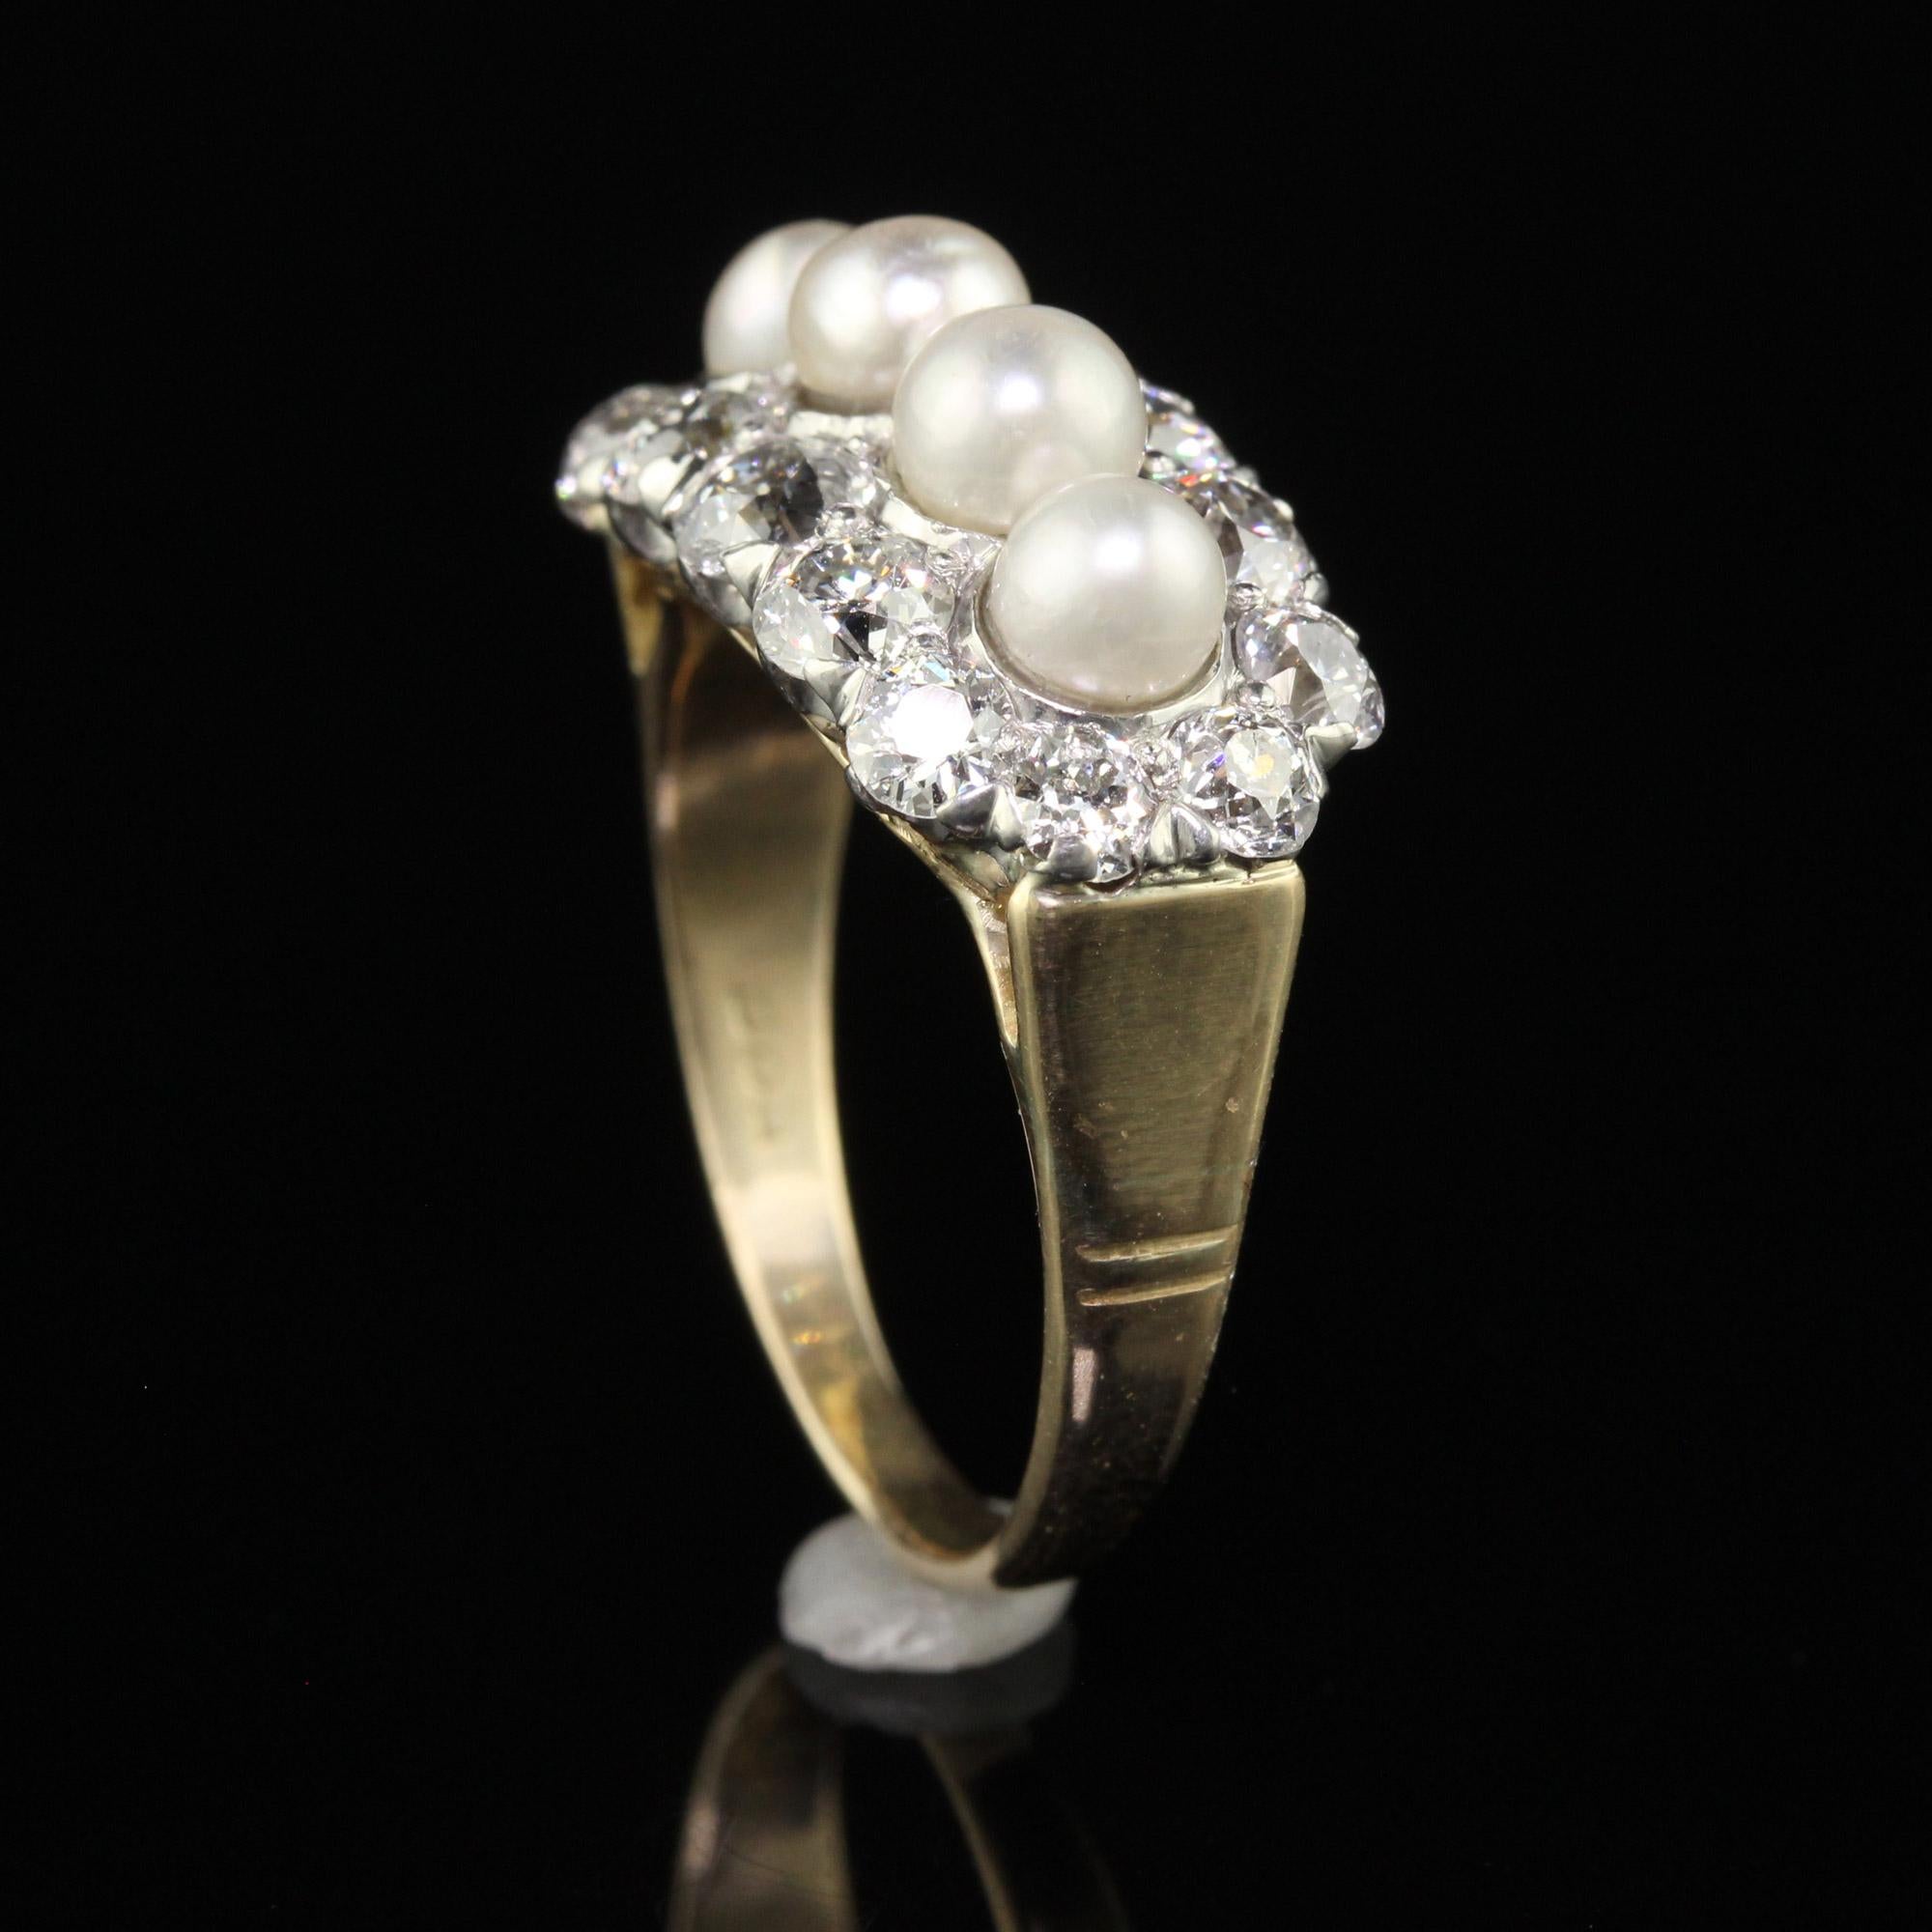 Antique Art Deco 14K Gold and Platinum Old Euro Diamond and Pearl Cocktail Ring For Sale 2